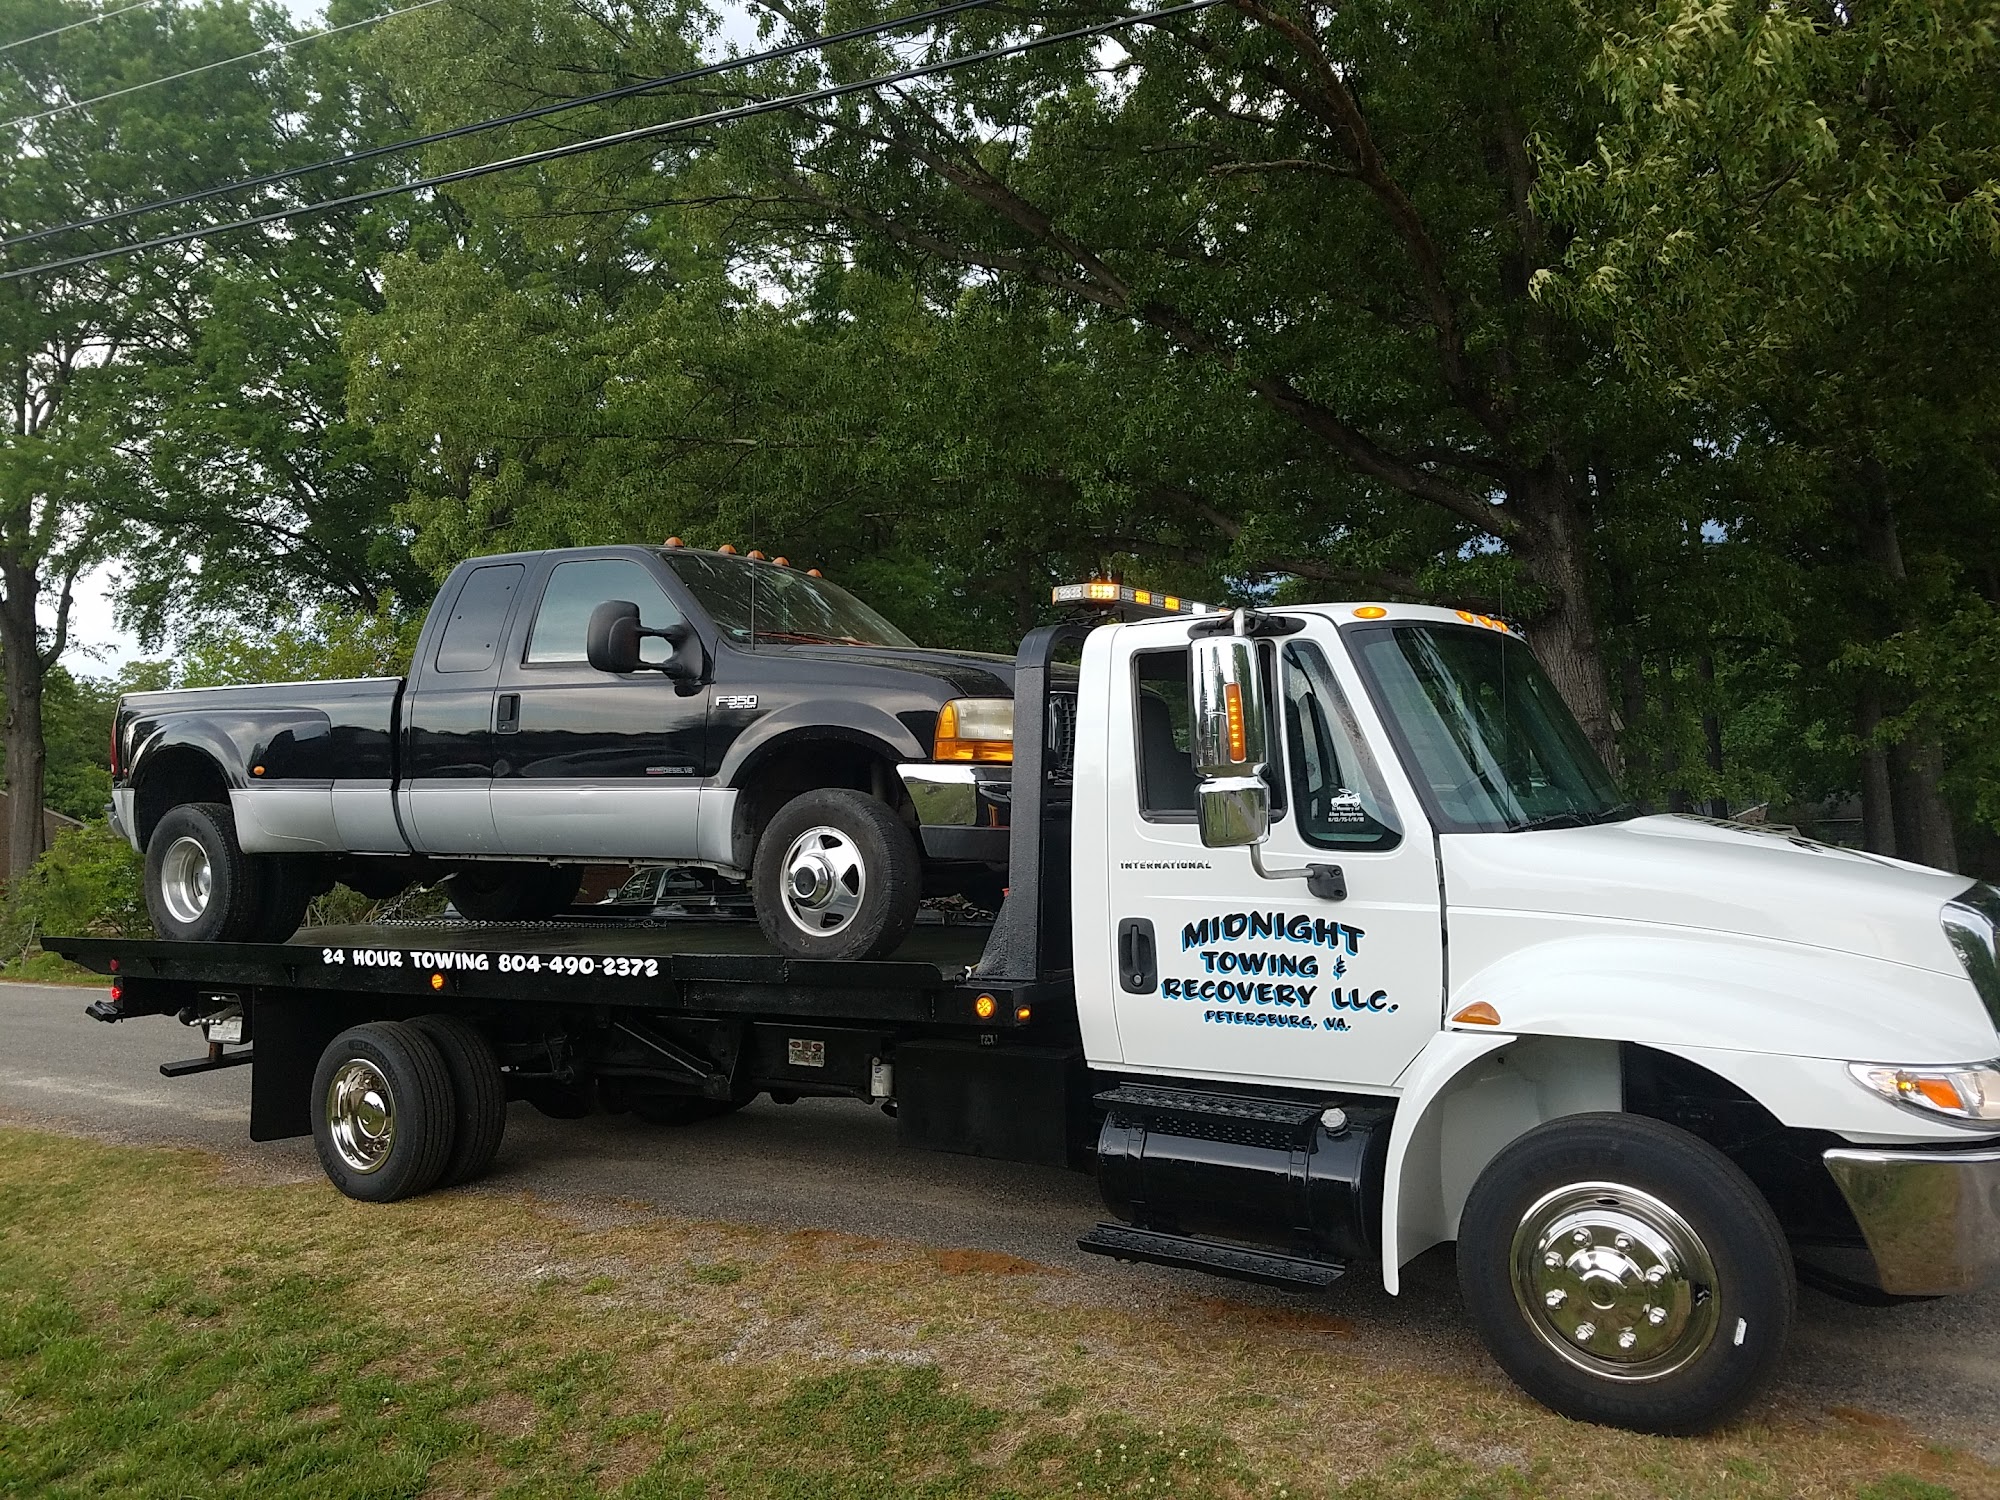 Midnight Towing & Recovery LLC